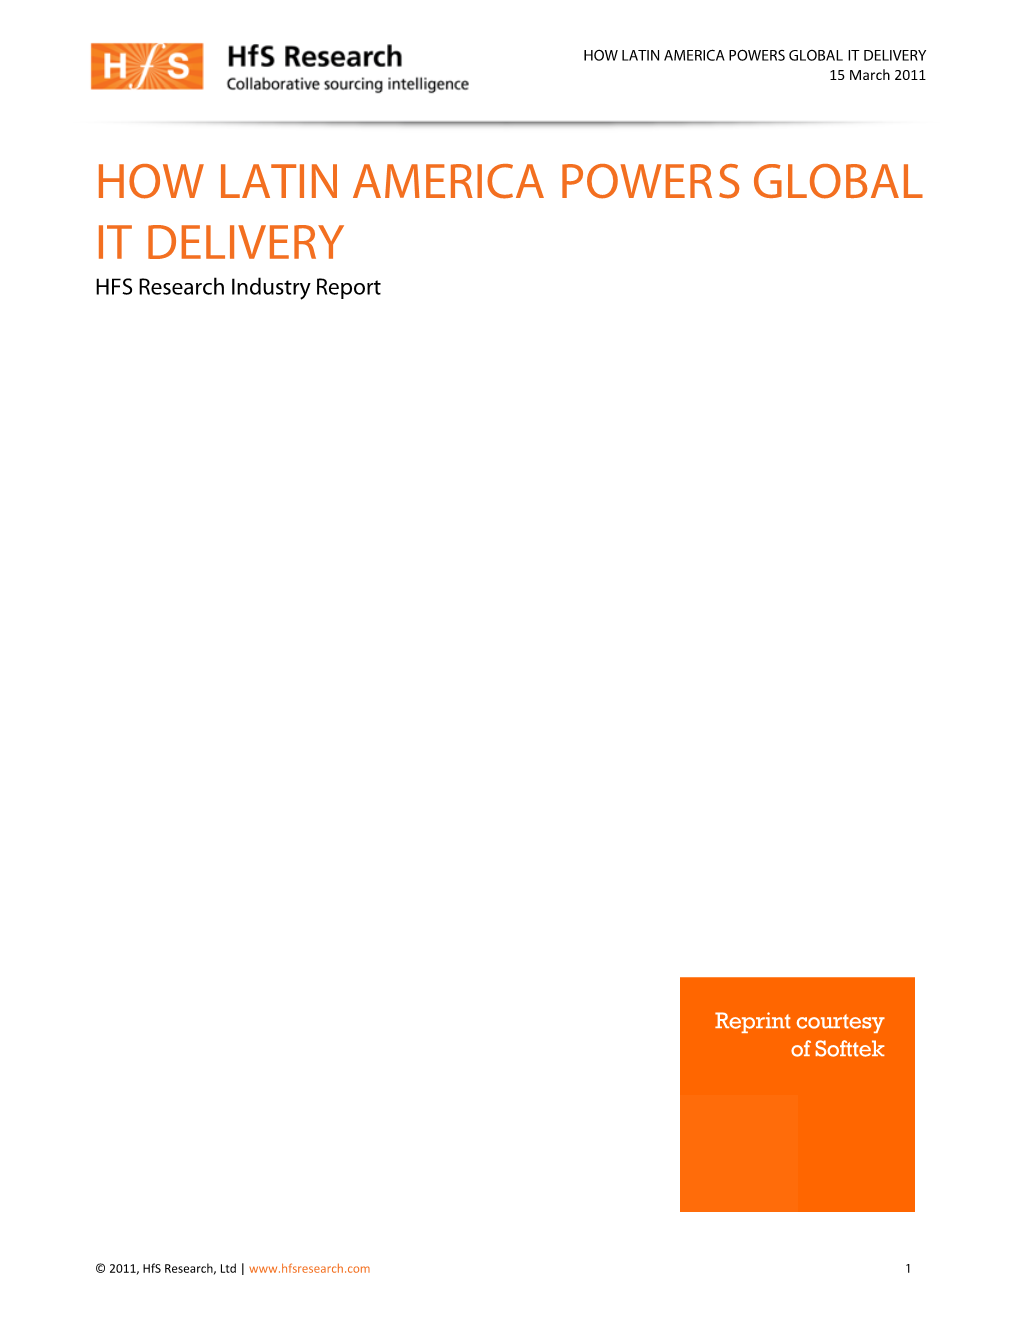 HOW LATIN AMERICA POWERS GLOBAL IT DELIVERY 15 March 2011